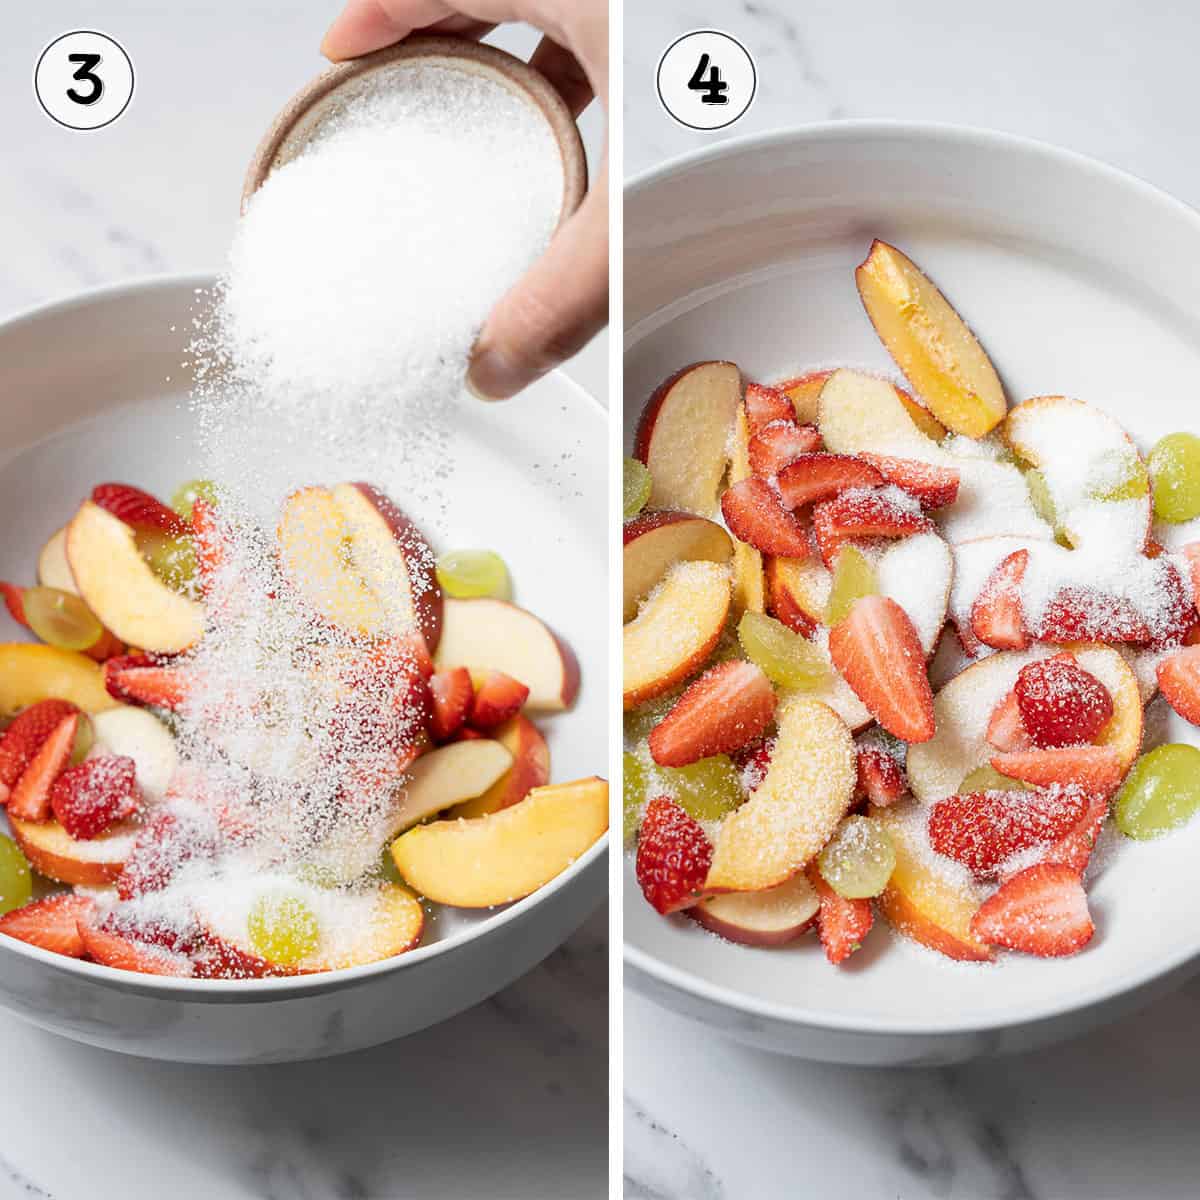 pouring sugar onto the sliced fruit.